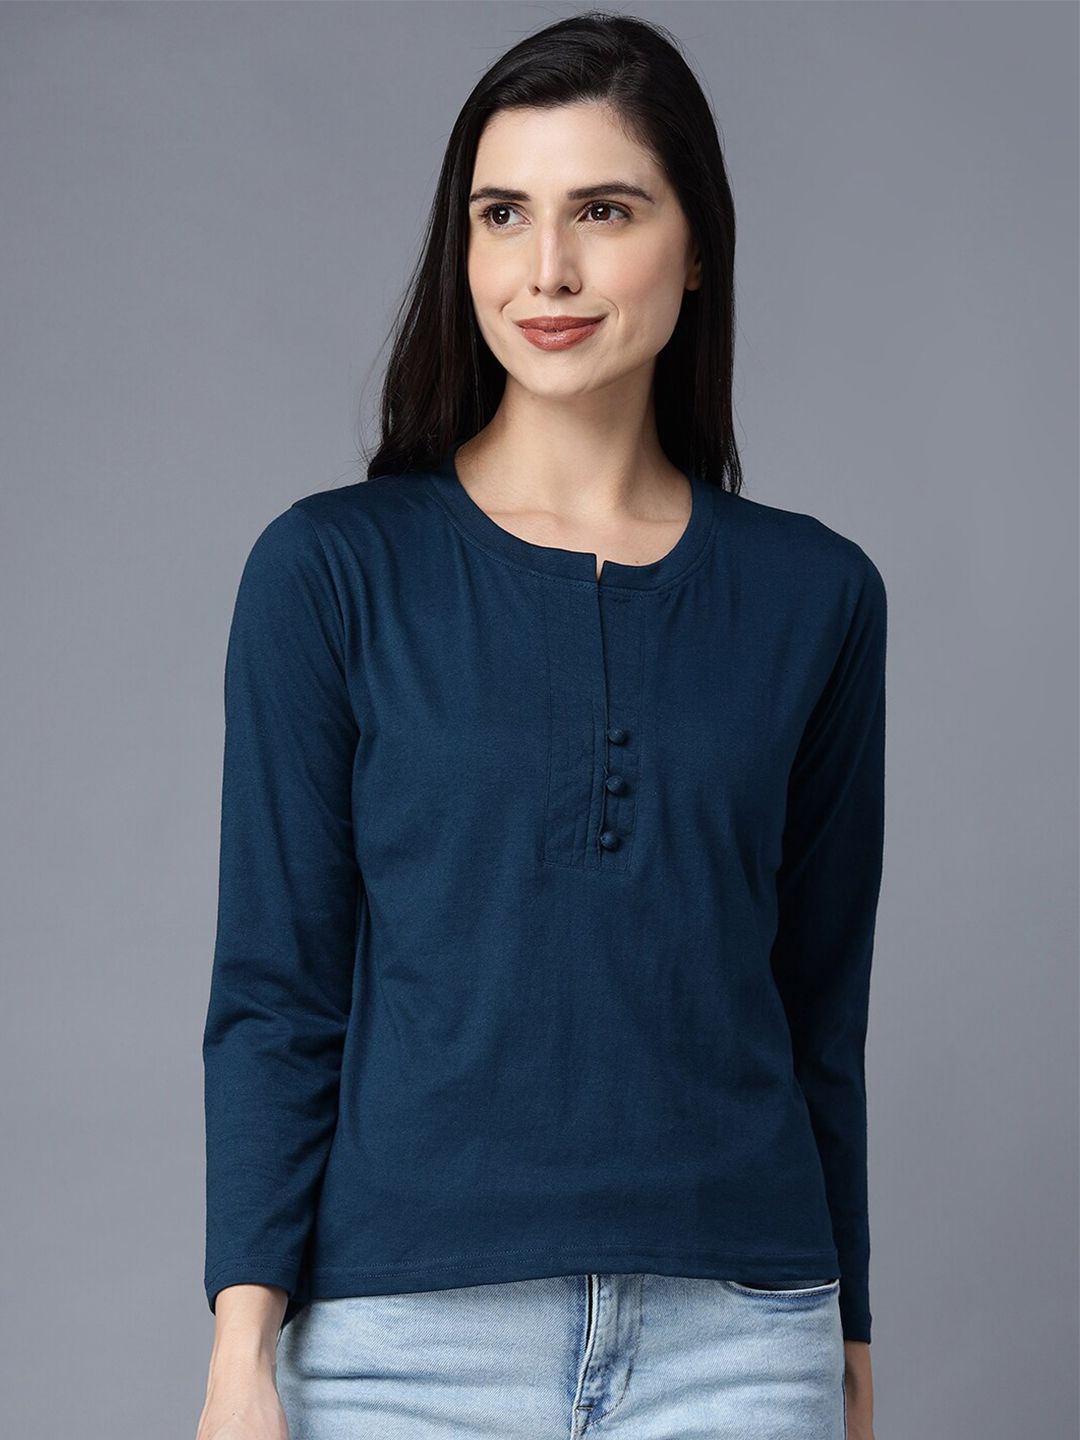 THE EG STORE Women Cotton T-shirt Price in India